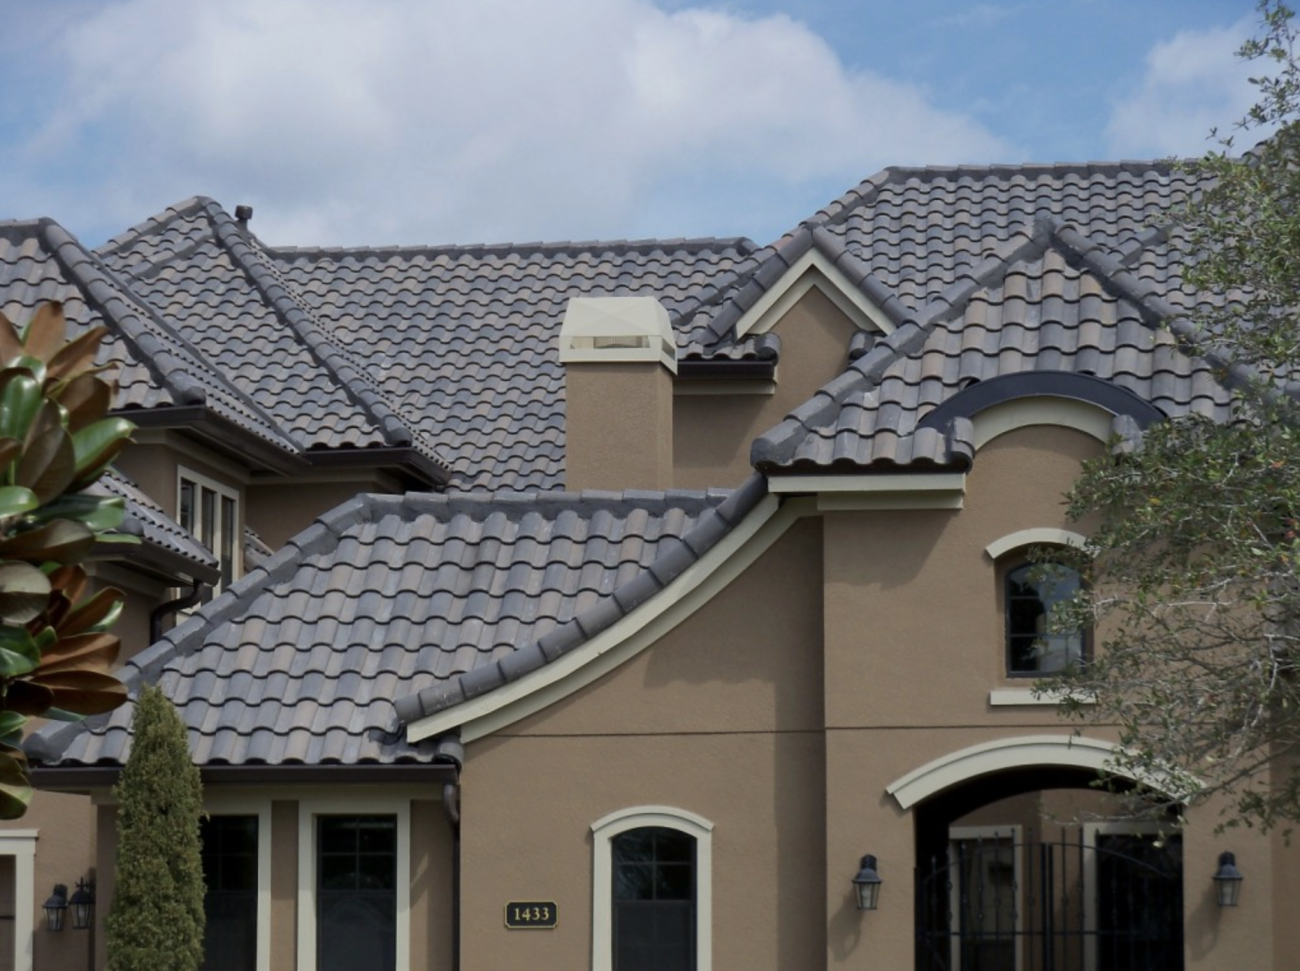 Luxurious residence with taupe-coloured walls, featuring a gabled roof covered with grey clay tiles